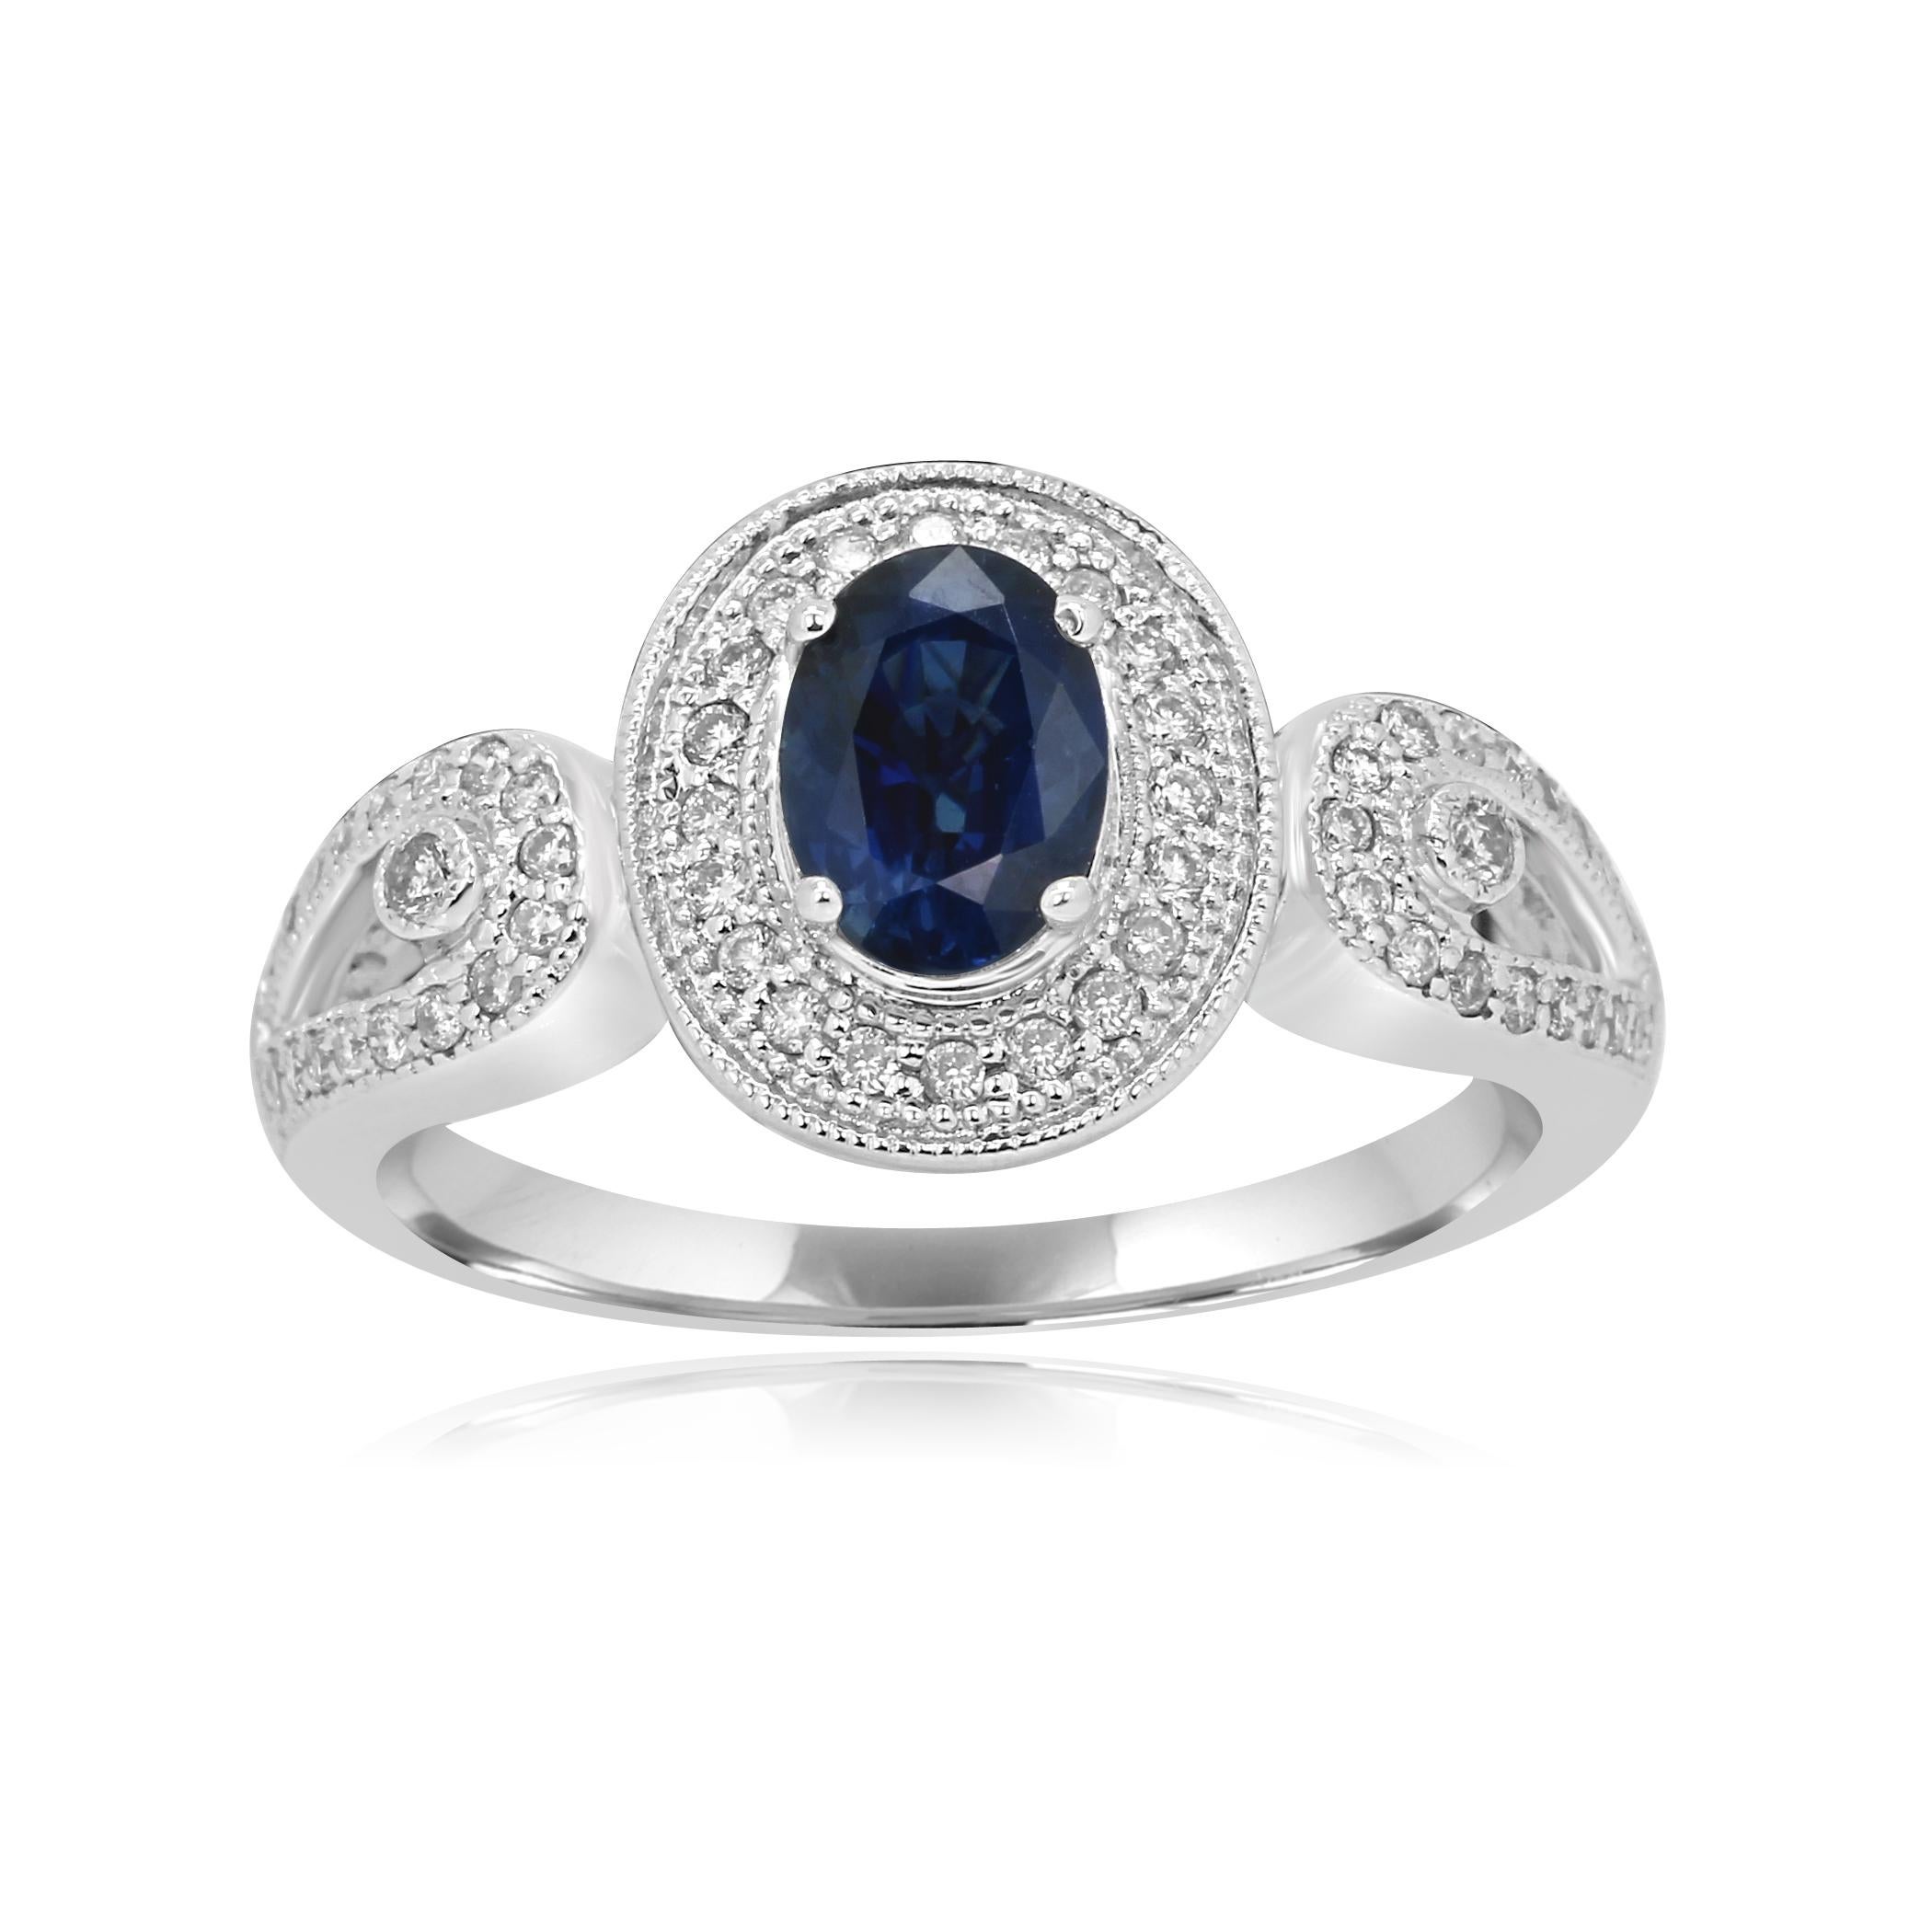 Blue Sapphire oval 1.01 Carat encircled in a single Halo of Round Brilliant Colorless SI Diamond 0.23 Carat. In a stunning 18K White Gold Fashion as well as bridal ring.

Style available in different price ranges. Prices are based on your selection